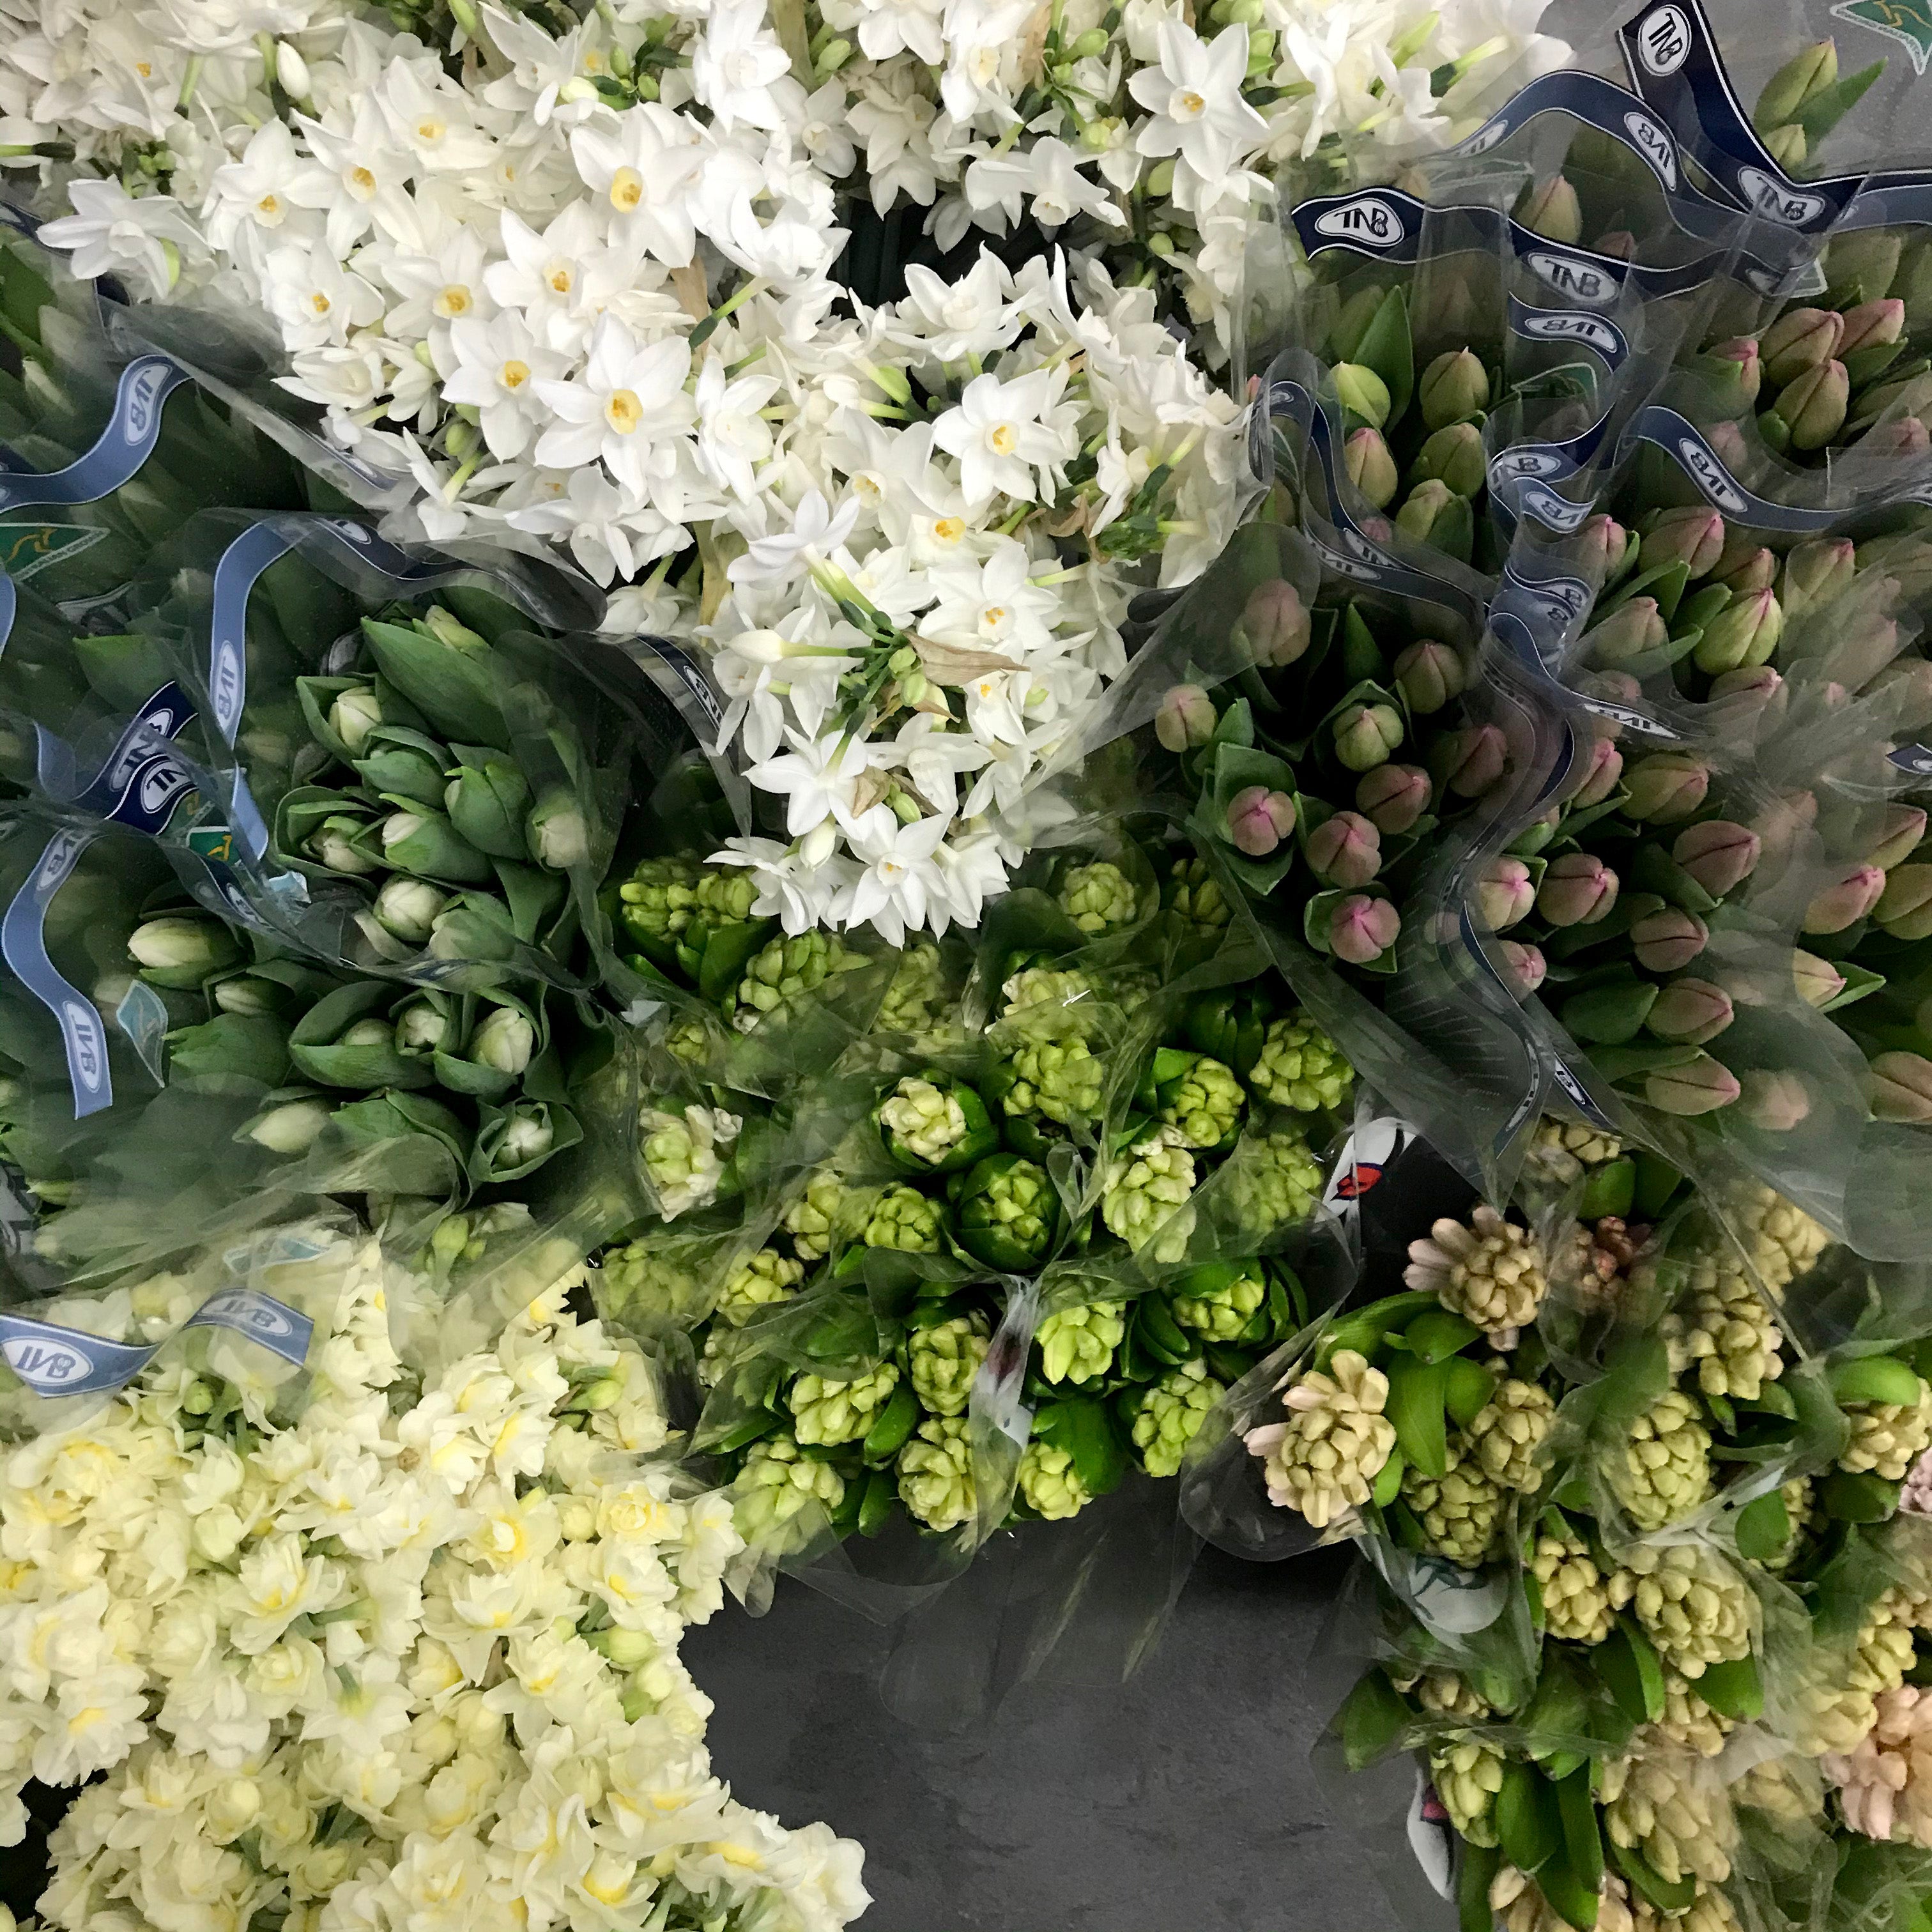 Erlicheer flowers in Melbourne florist ready for delivery